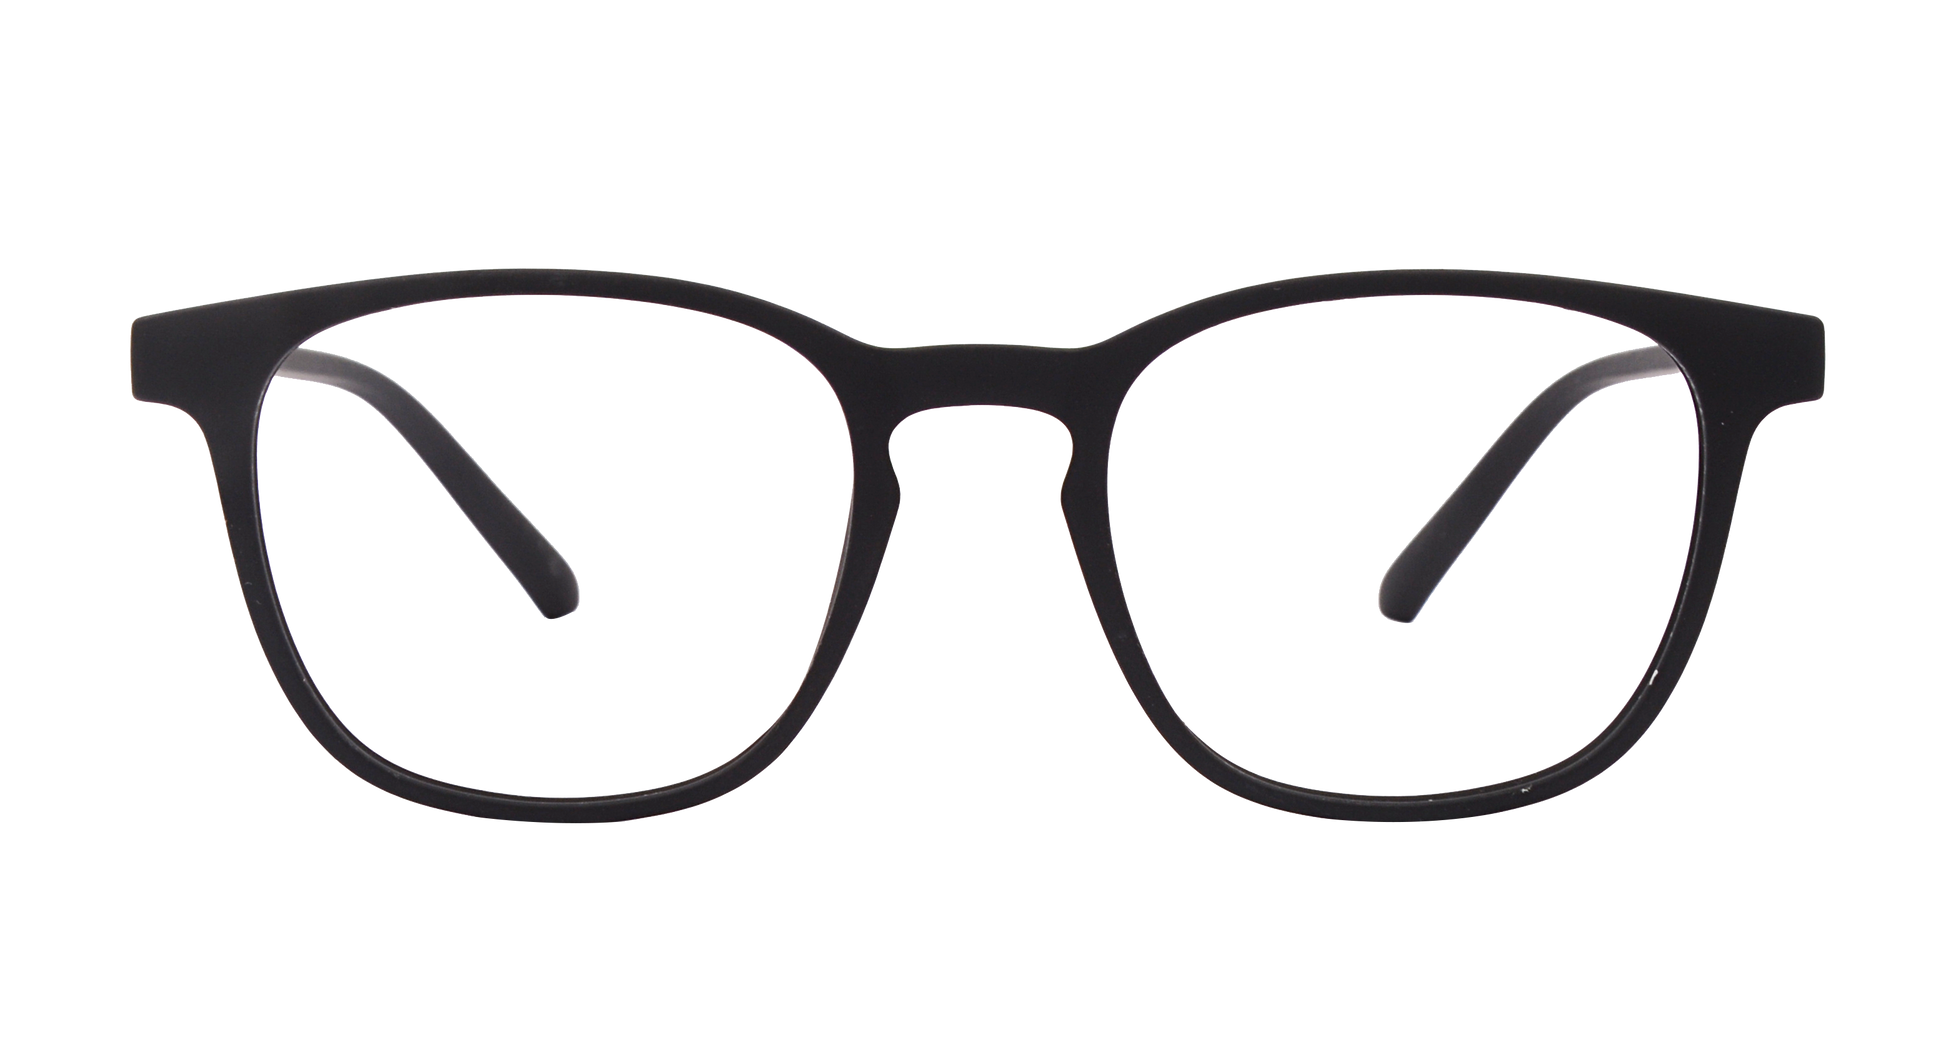 The image depicts a pair of yellow reading glasses on a black background. The glasses are the central focus of the photo and are positioned slightly off-center. They have rectangular frames and slightly curved temples at the sides, and are lying flat on their side. The glasses are yellow with a lighter-colored interior and are prominently placed against a white background that gradually fades to black at the edges. 